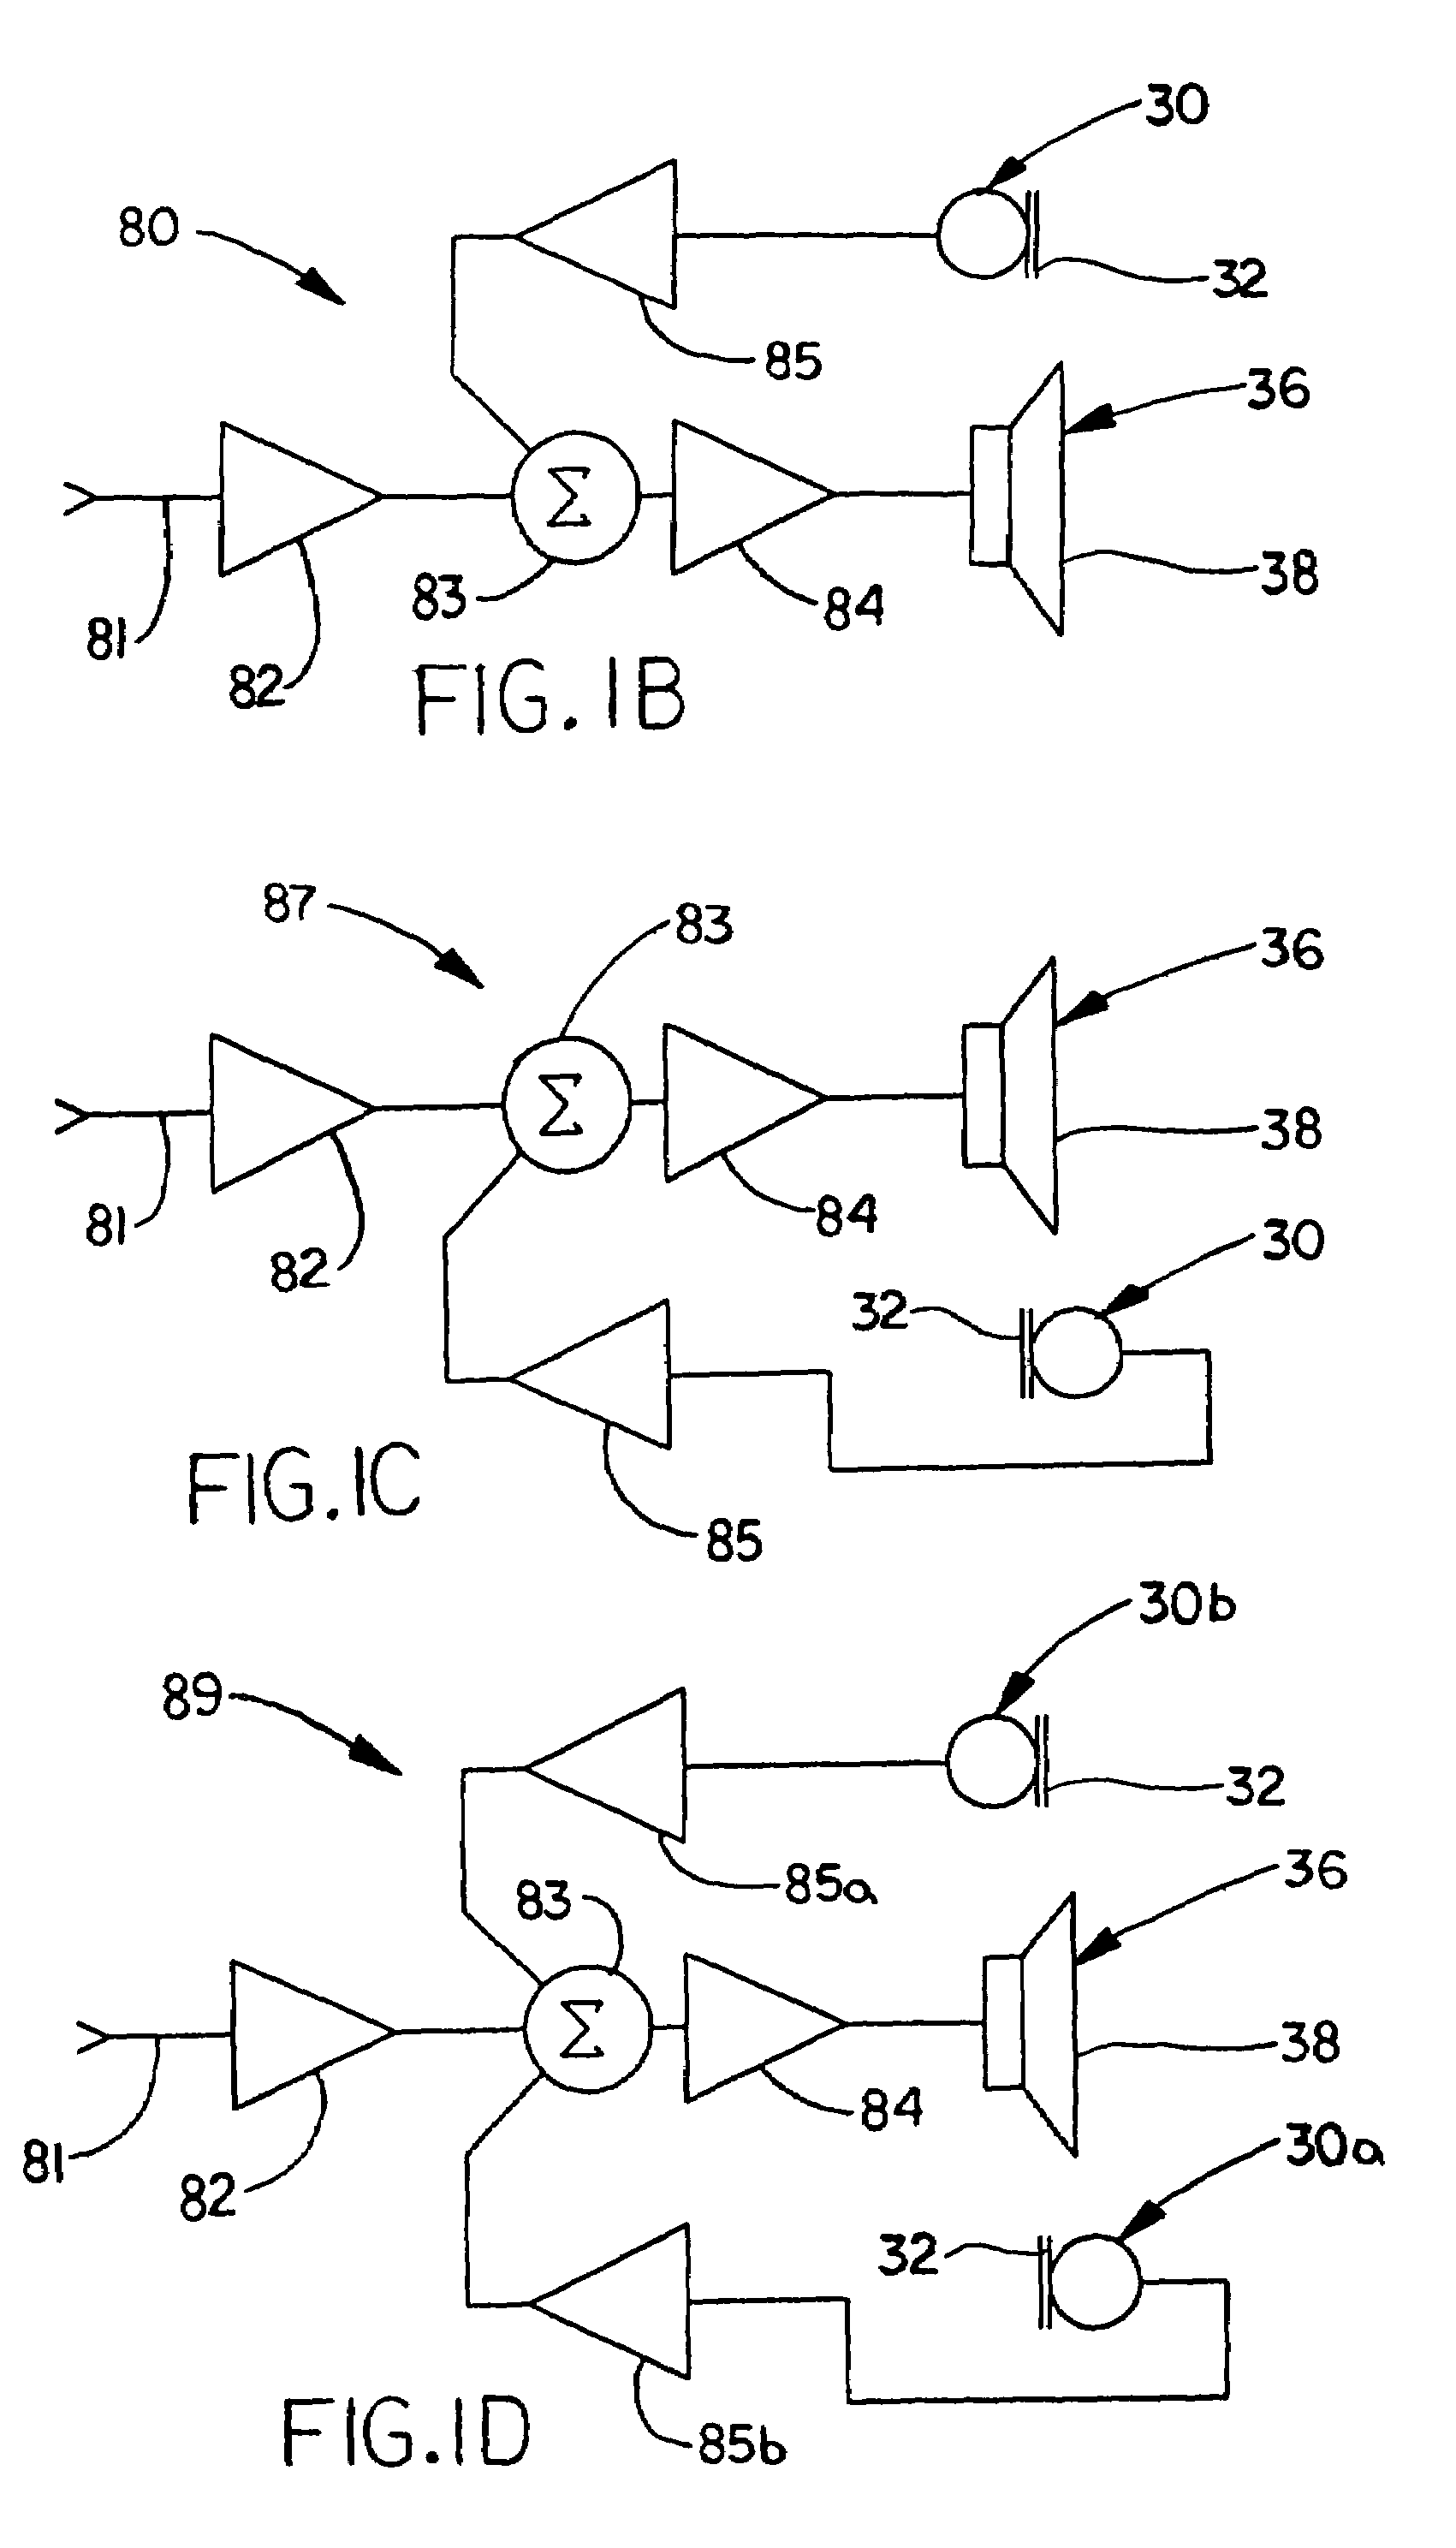 Electroacoustic devices with noise-reducing capability